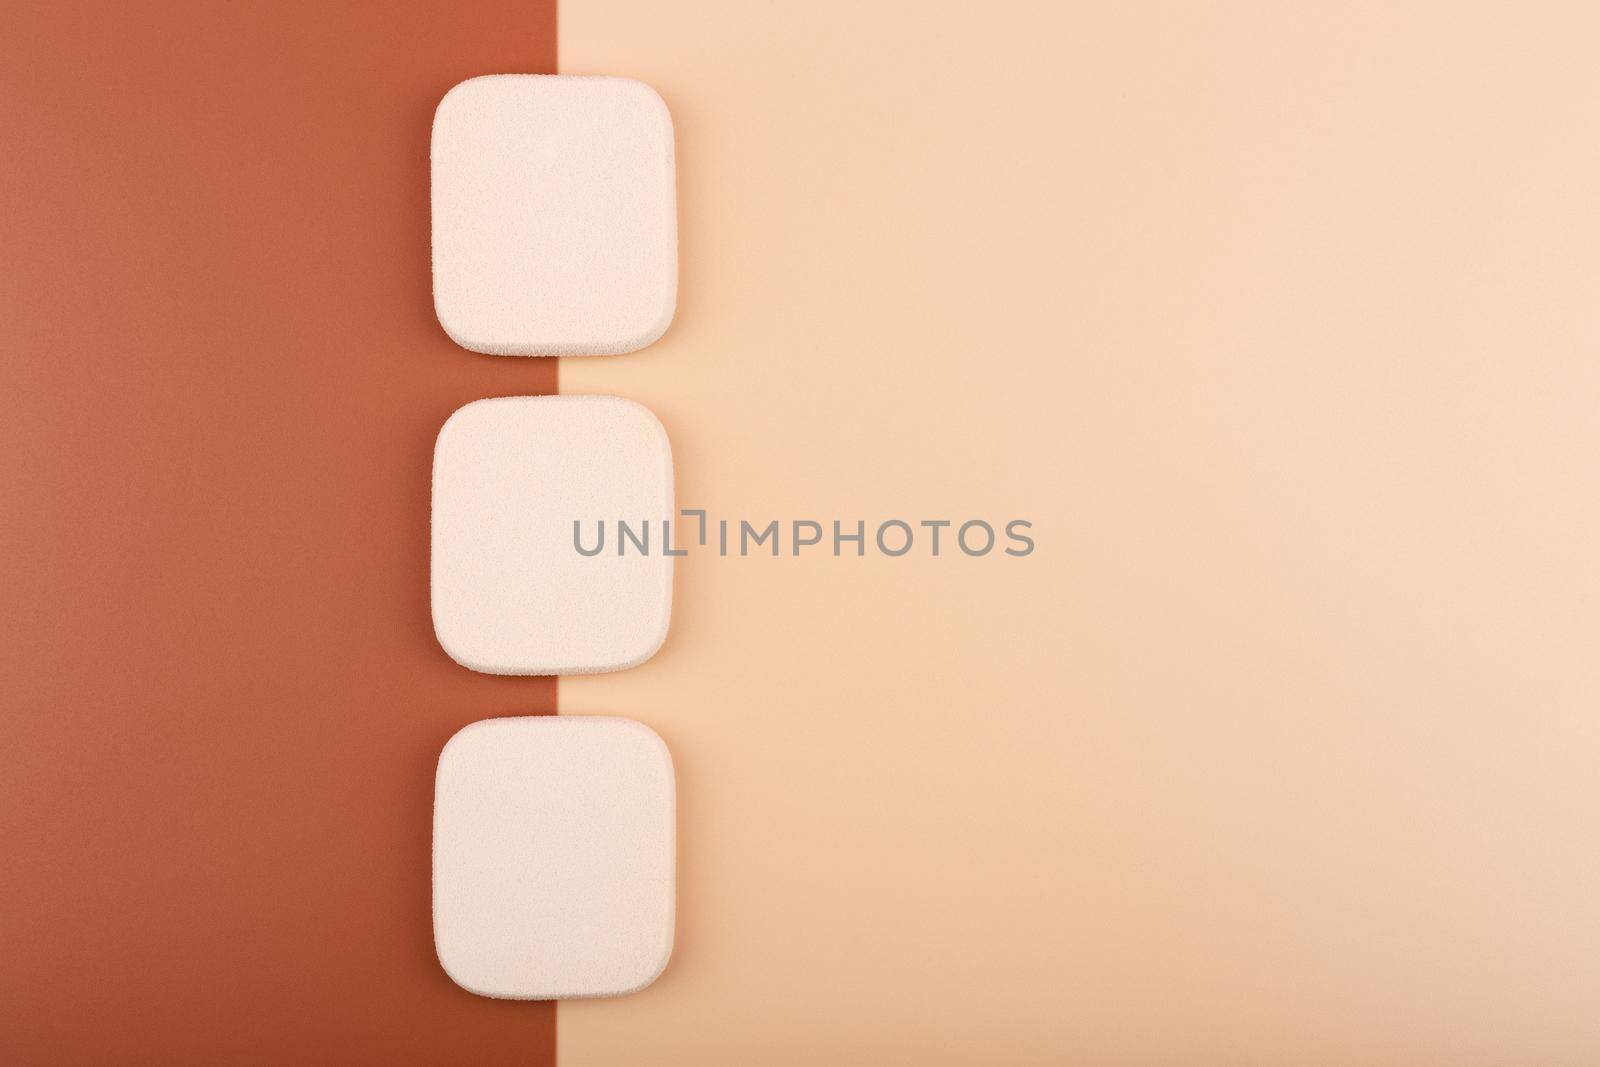 Top view of three square shaped make up sponges on beige and brown backgrounds. Concept of make up and matching foundation for different skin tones